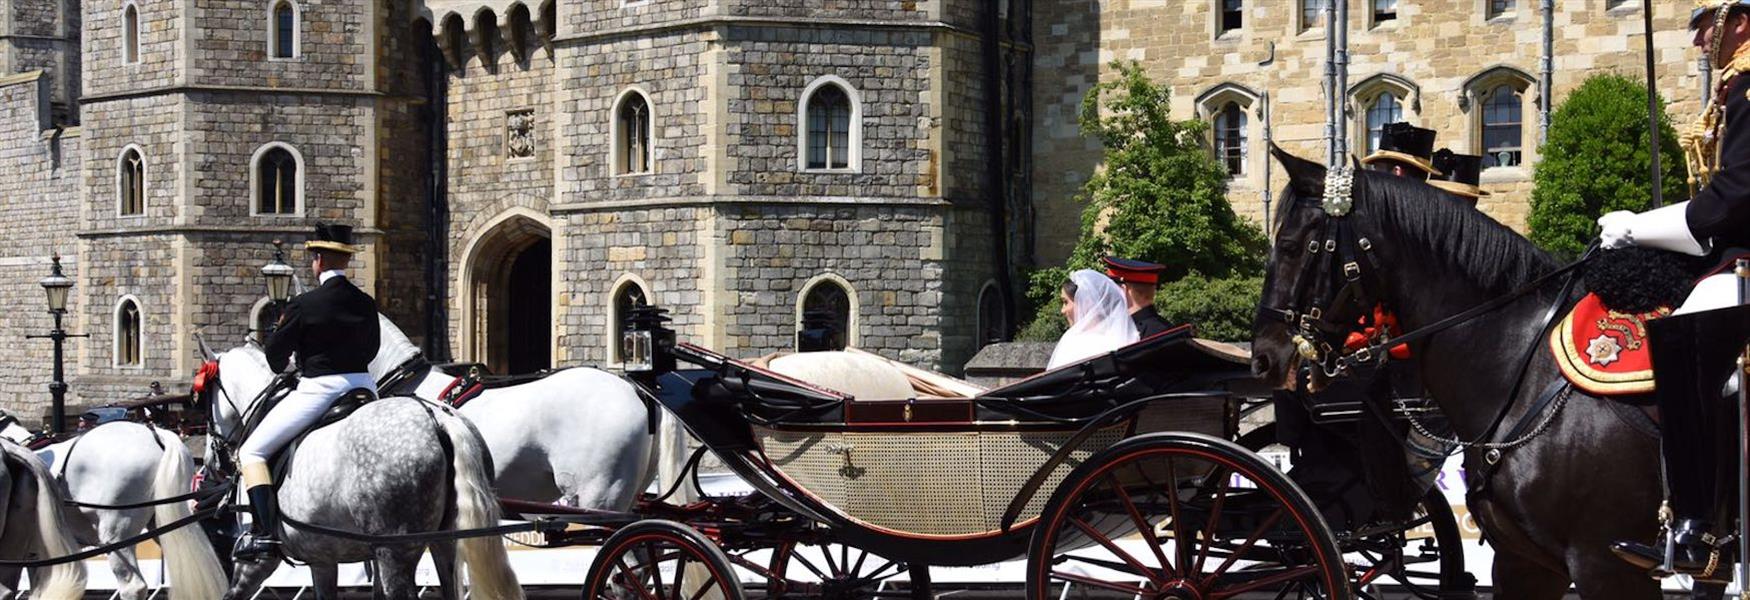 The Duke and Duchess of Sussex's carriage procession